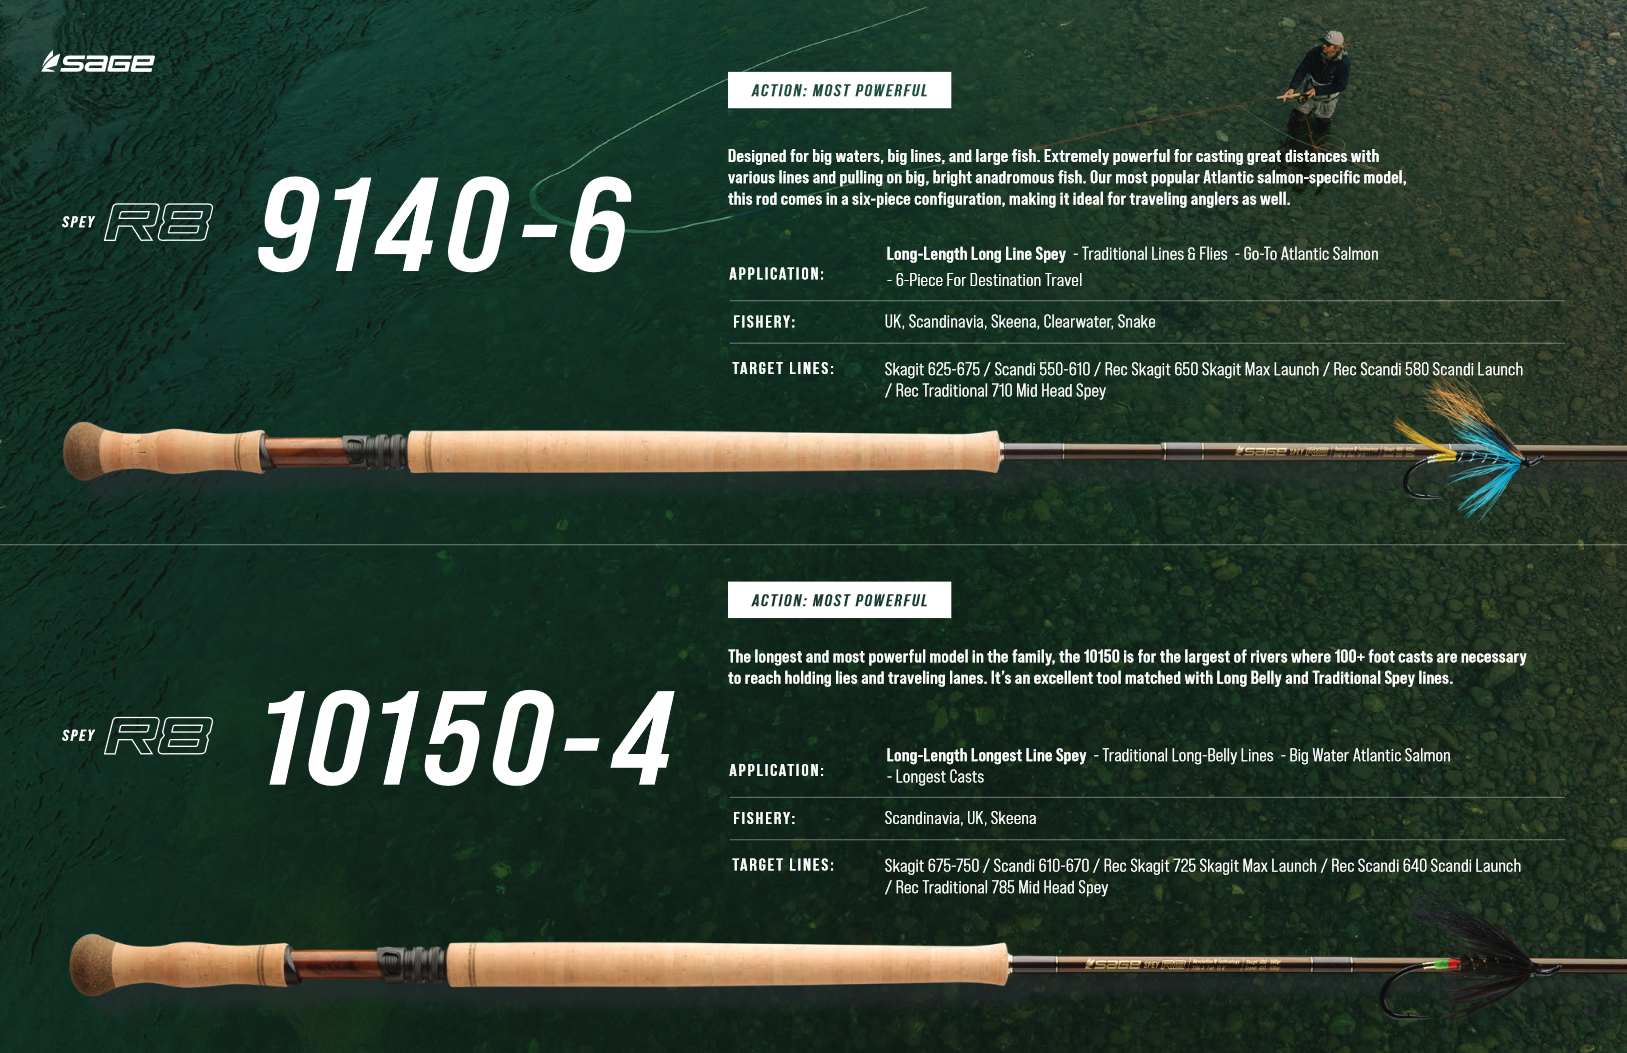 Sage SPEY R8 10150-4 10wt 15'0" The Most Powerful Spey Rods - NEW!